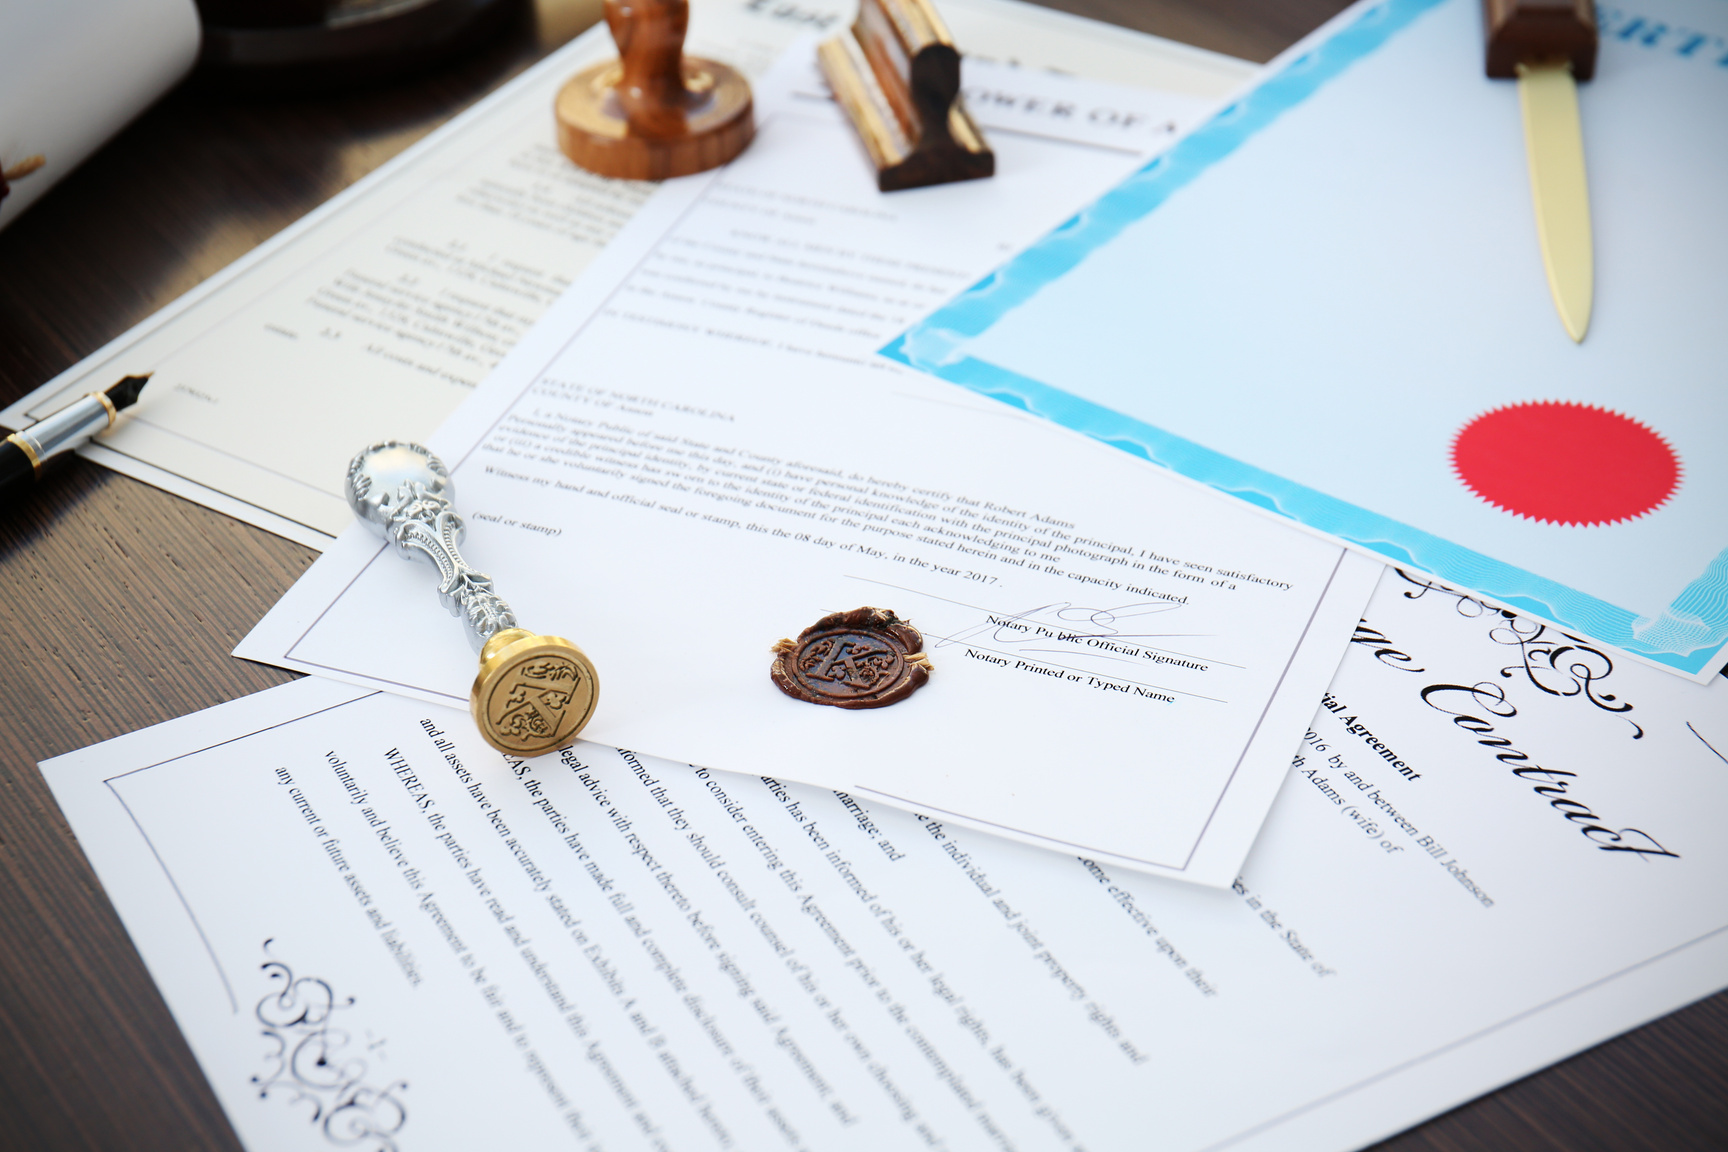 Documents with Notarial Stamps